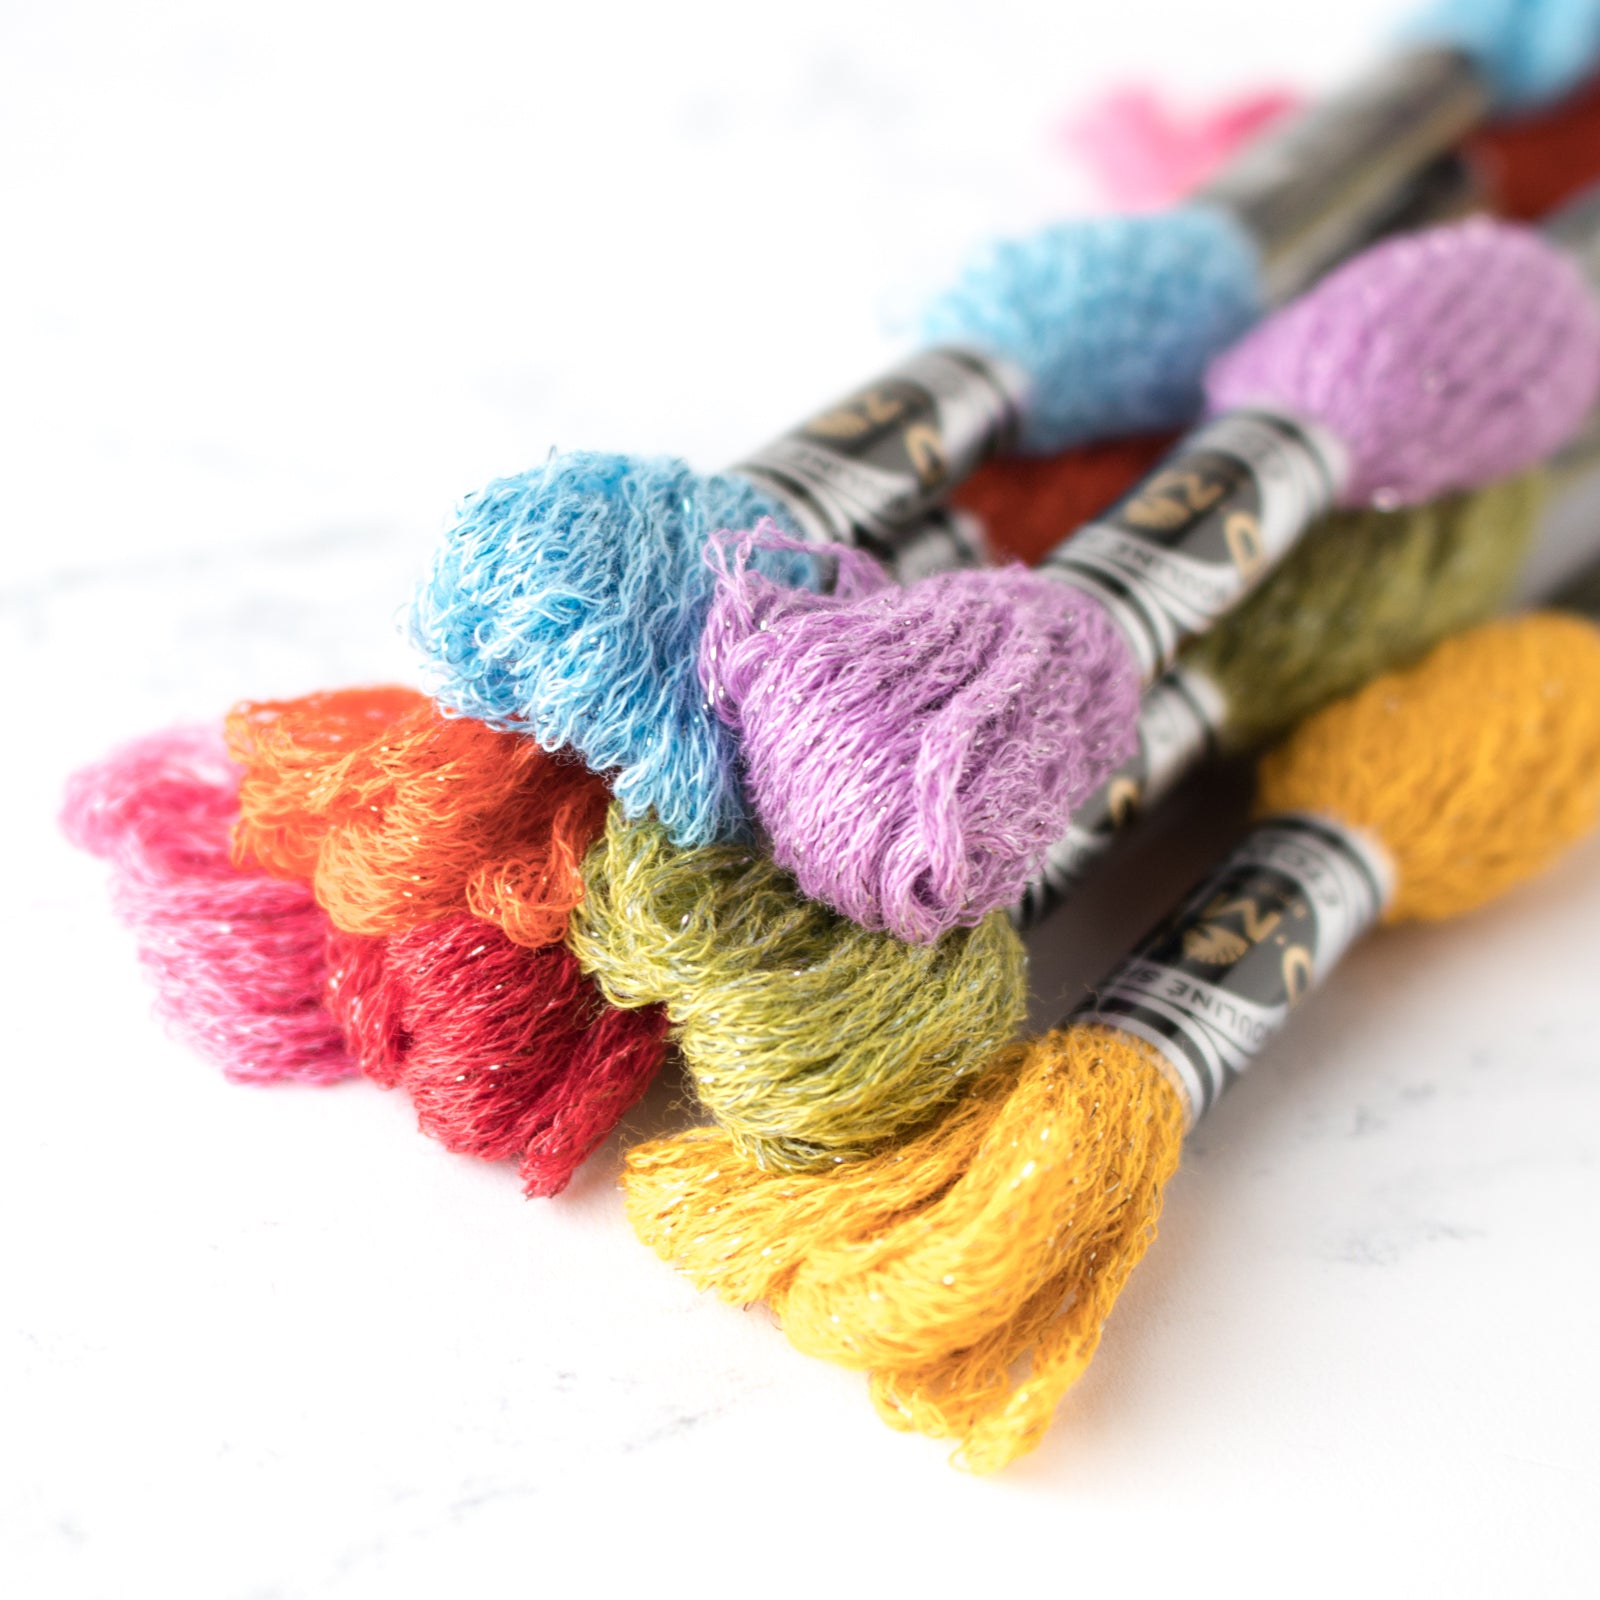 DMC 27ct Pastel Colored Embroidery Floss